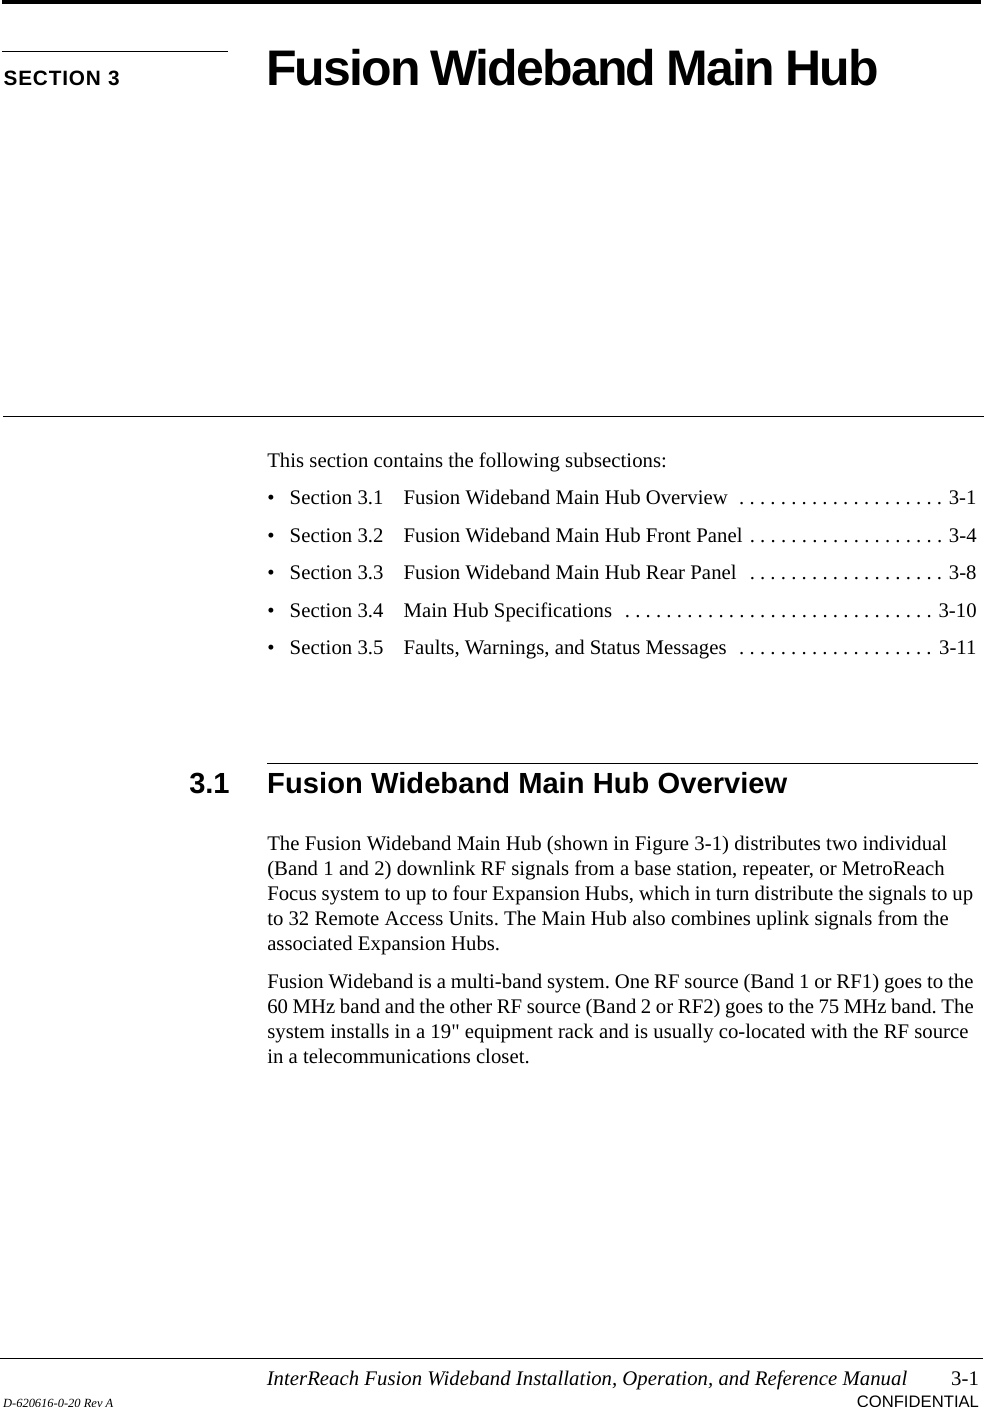 InterReach Fusion Wideband Installation, Operation, and Reference Manual 3-1D-620616-0-20 Rev A CONFIDENTIALSECTION 3 Fusion Wideband Main HubThis section contains the following subsections:• Section 3.1   Fusion Wideband Main Hub Overview  . . . . . . . . . . . . . . . . . . . . 3-1• Section 3.2   Fusion Wideband Main Hub Front Panel . . . . . . . . . . . . . . . . . . . 3-4• Section 3.3   Fusion Wideband Main Hub Rear Panel  . . . . . . . . . . . . . . . . . . . 3-8• Section 3.4   Main Hub Specifications  . . . . . . . . . . . . . . . . . . . . . . . . . . . . . . 3-10• Section 3.5   Faults, Warnings, and Status Messages  . . . . . . . . . . . . . . . . . . . 3-113.1 Fusion Wideband Main Hub OverviewThe Fusion Wideband Main Hub (shown in Figure 3-1) distributes two individual (Band 1 and 2) downlink RF signals from a base station, repeater, or MetroReach Focus system to up to four Expansion Hubs, which in turn distribute the signals to up to 32 Remote Access Units. The Main Hub also combines uplink signals from the associated Expansion Hubs.Fusion Wideband is a multi-band system. One RF source (Band 1 or RF1) goes to the 60 MHz band and the other RF source (Band 2 or RF2) goes to the 75 MHz band. The system installs in a 19&quot; equipment rack and is usually co-located with the RF source in a telecommunications closet.